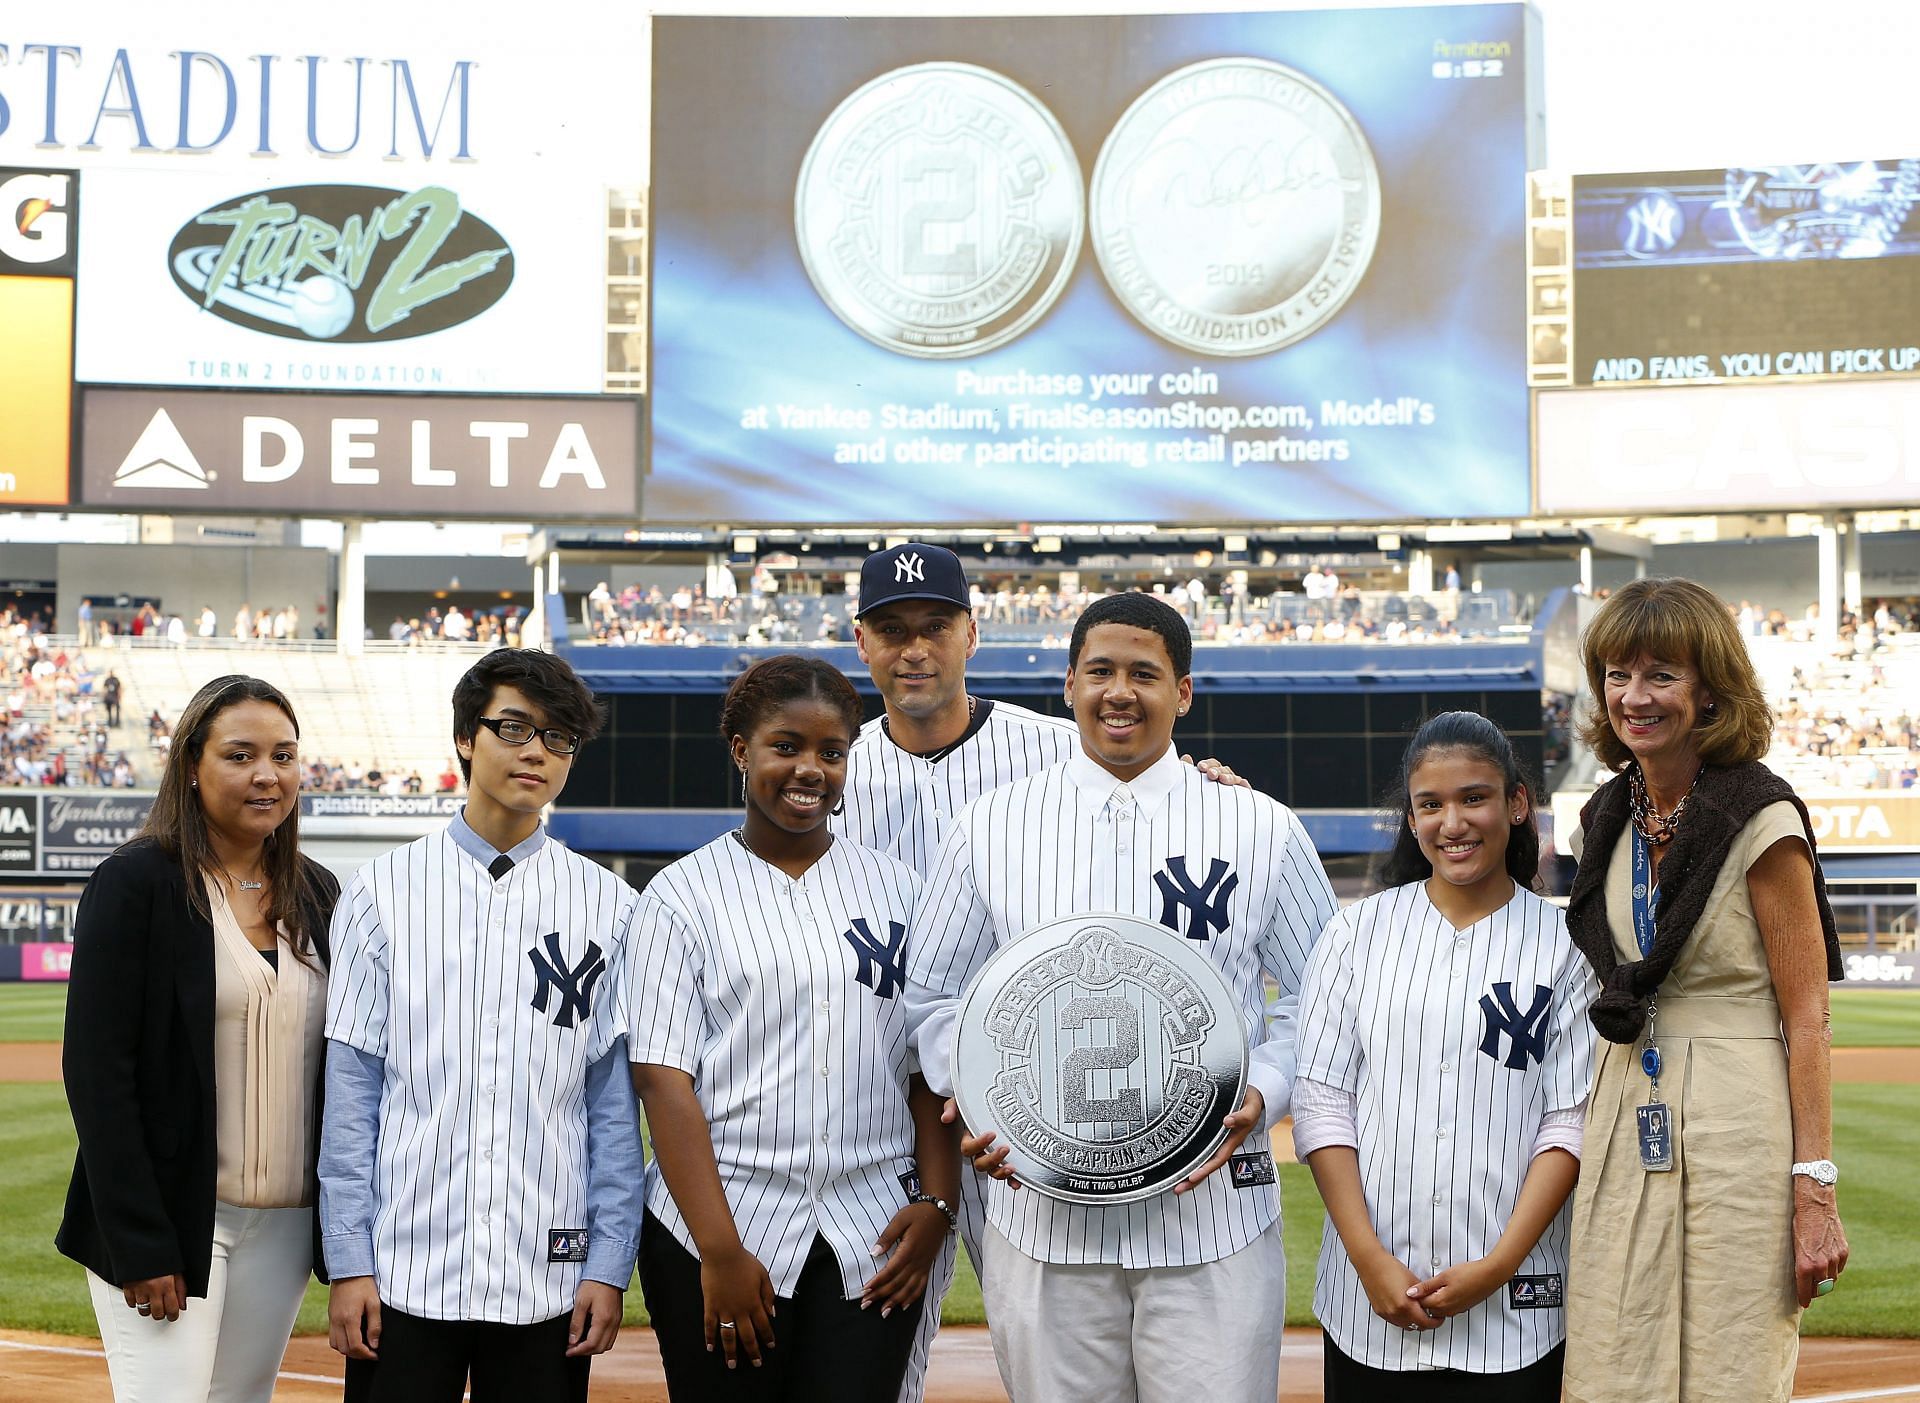 Tampa Bay Rays v New York Yankees NEW YORK, NY - JULY 01: Derek Jeter #2 of the New York Yankees stands with members of his Turn 2 Foundation and their commemorative coin launch before the start of a game against the Tampa Bay Rays at Yankee Stadium on July 1, 2014 in the Bronx borough of New York City. (Photo by Rich Schultz/Getty Images)